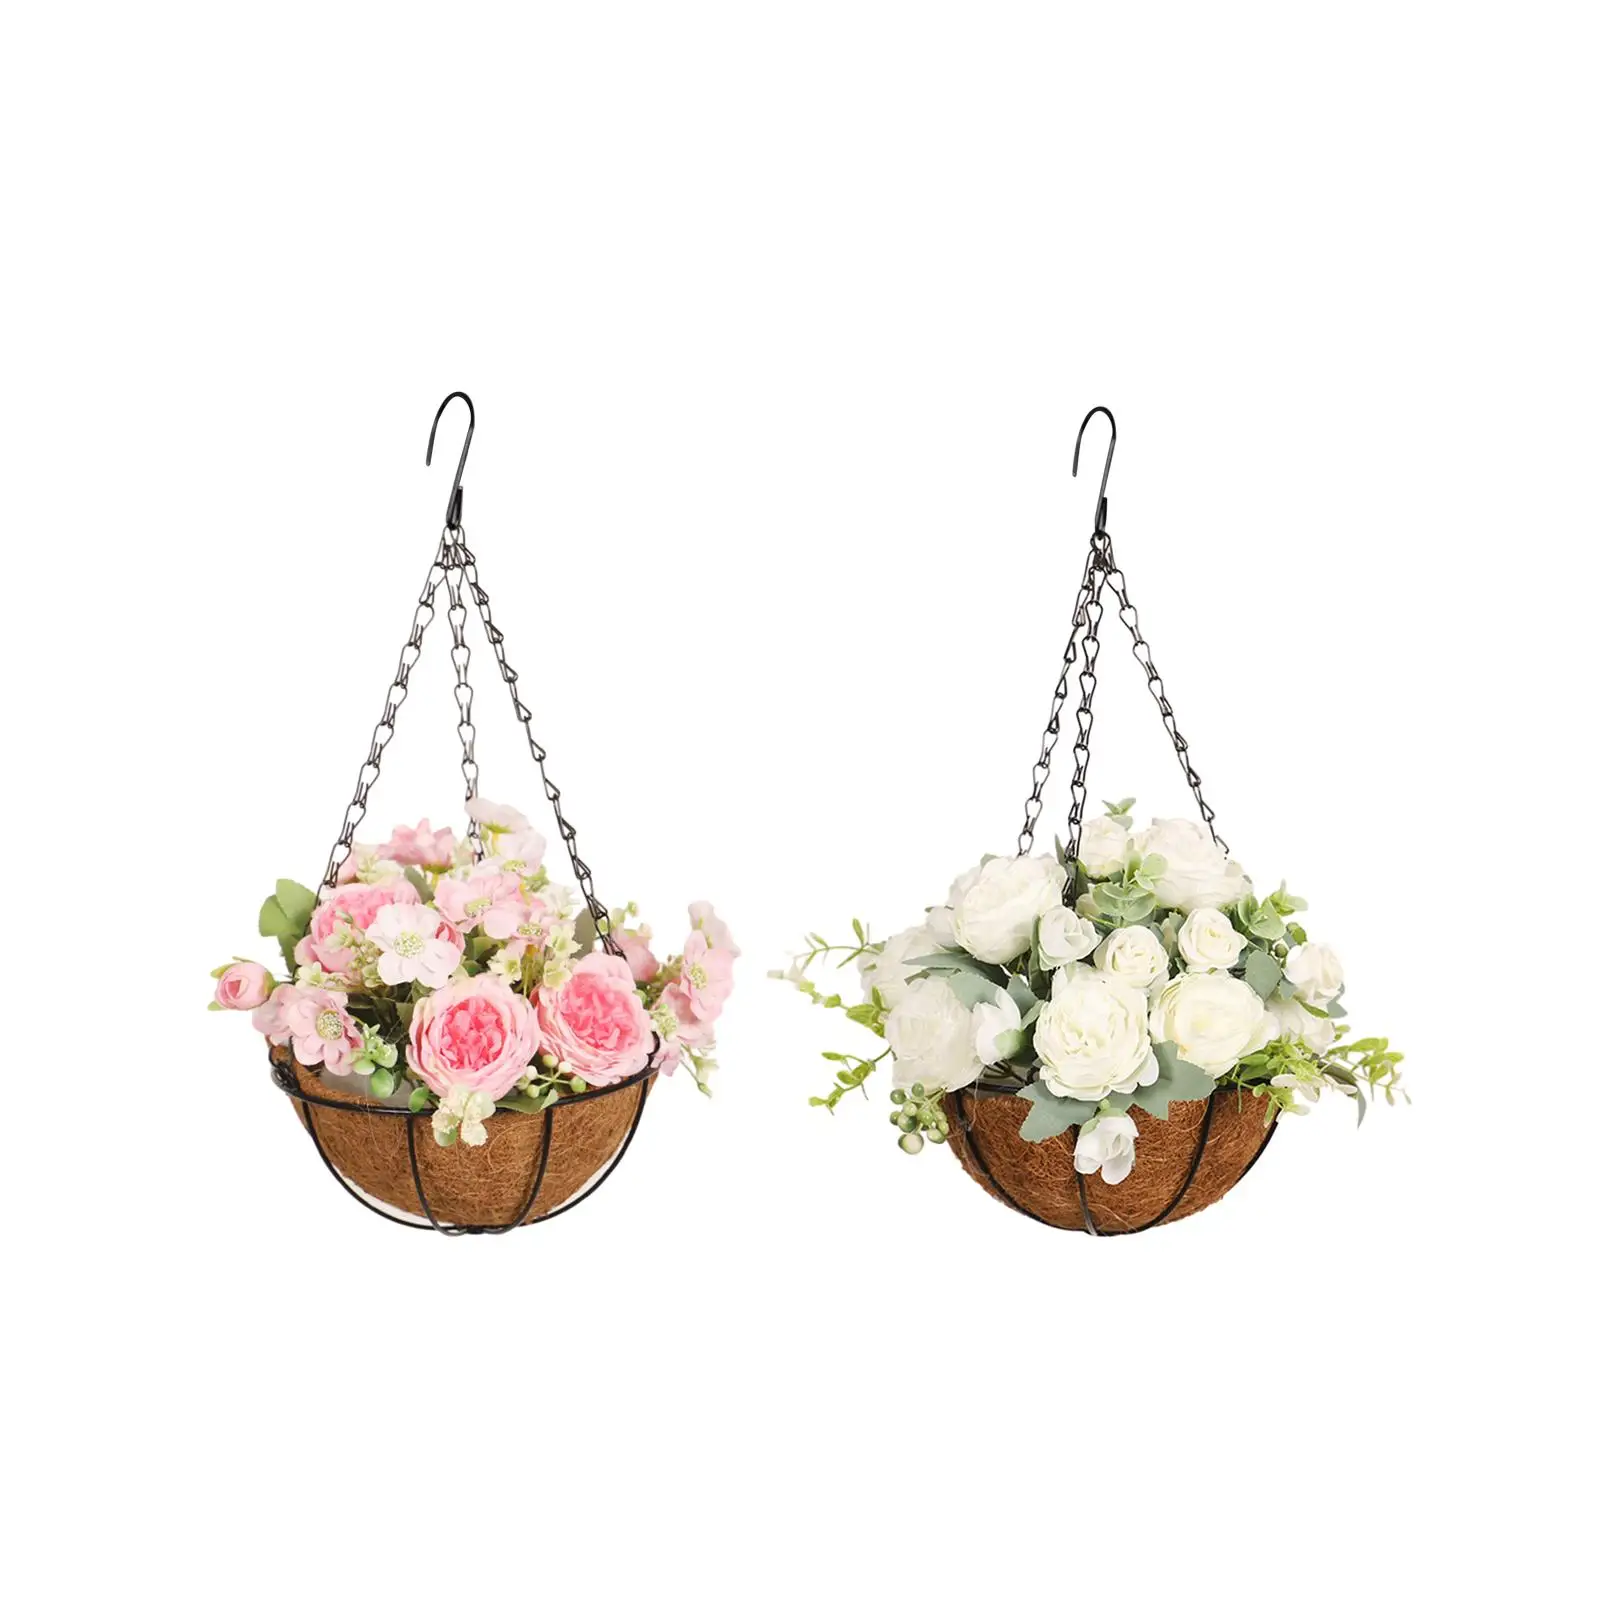 Artificial Hanging Flowers in Basket Chain Flower Pot Hanging Planter for Porch Courtyard Garden Outdoors and Indoors Patio